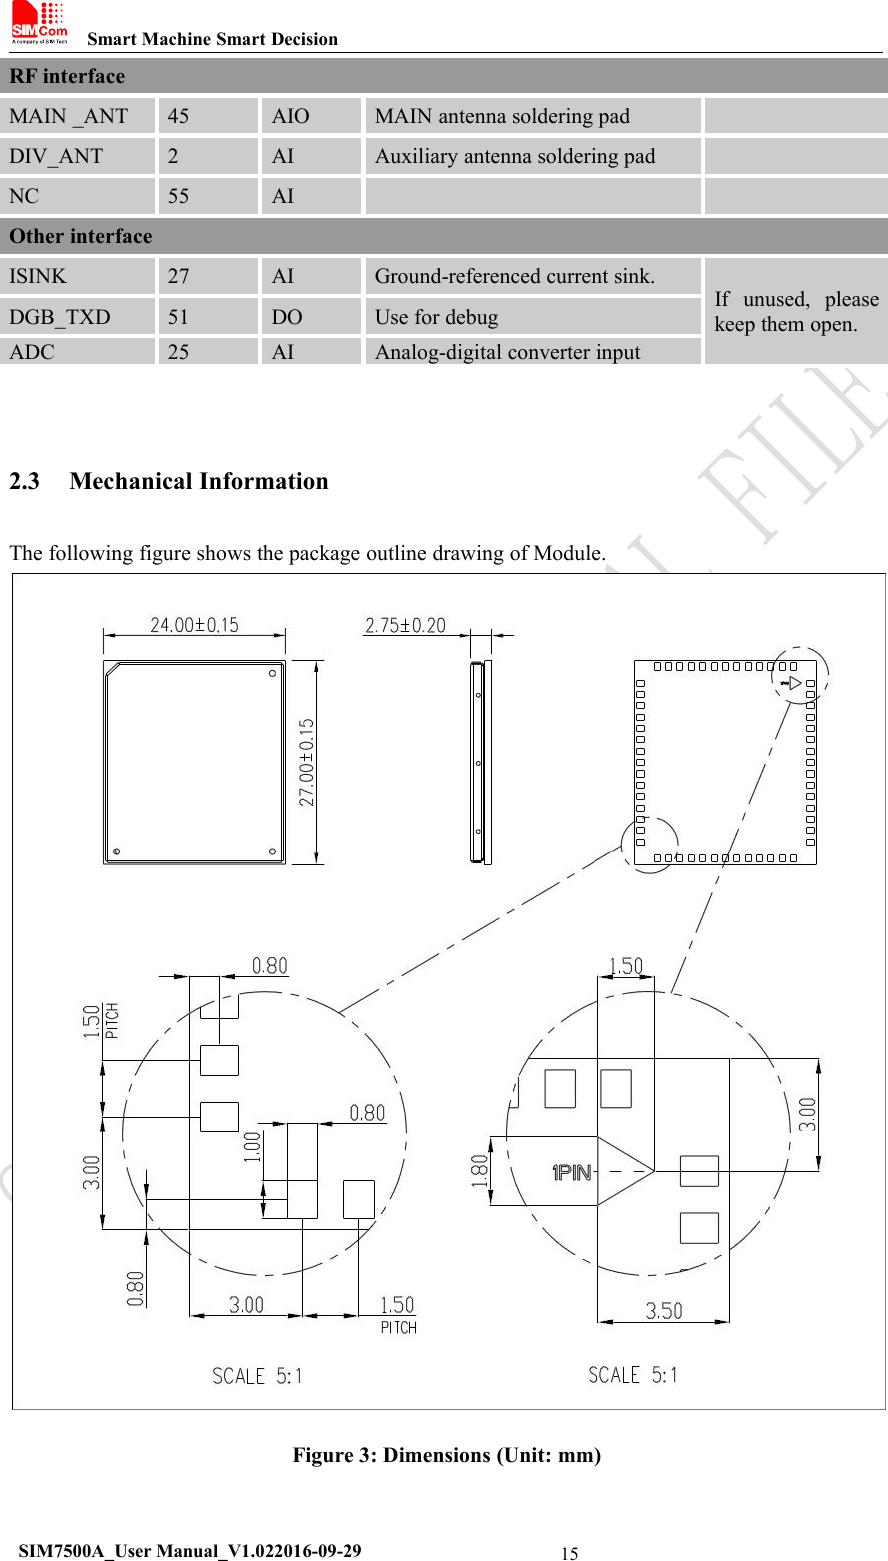 Smart Machine Smart DecisionSIM7500A_User Manual_V1.022016-09-2915RF interfaceMAIN _ANT45AIOMAIN antenna soldering padDIV_ANT2AIAuxiliary antenna soldering padNC55AIOther interfaceISINK27AIGround-referenced current sink.If unused, pleasekeep them open.DGB_TXD51DOUse for debugADC25AIAnalog-digital converter input2.3 Mechanical InformationThe following figure shows the package outline drawing of Module.Figure 3: Dimensions (Unit: mm)